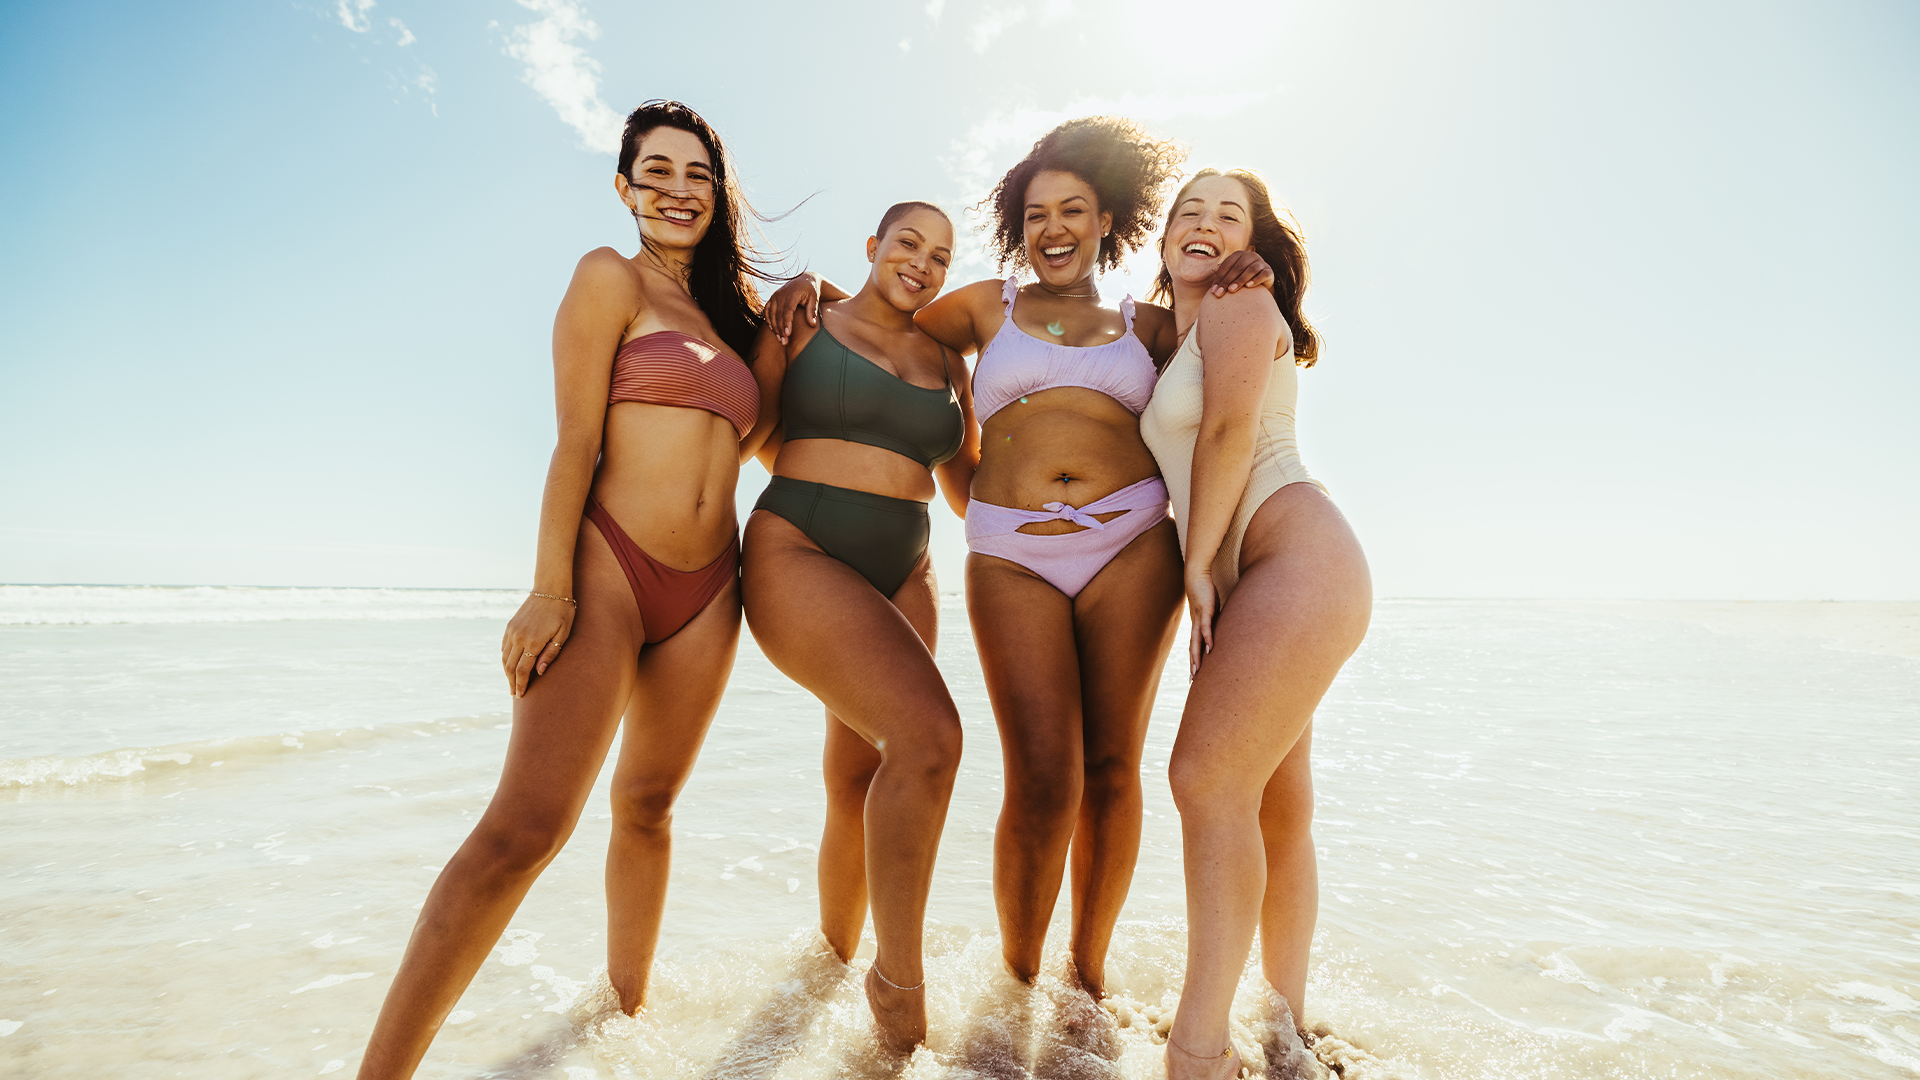 How to feel body confident this summer